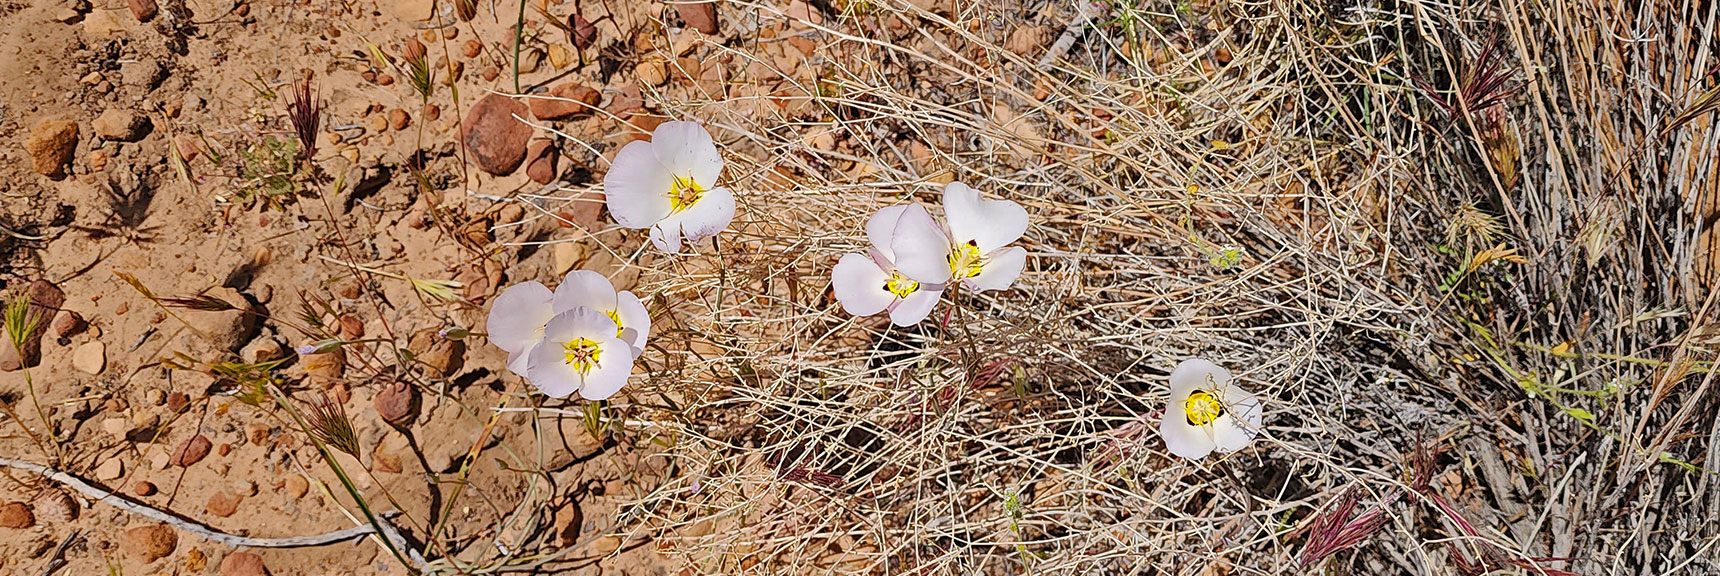 Straggling Mariposa Lily : Annual Mojave Desert Wildflowers | Juniper Canyon | Red Rock Canyon National Conservation Area, Nevada | David Smith | LasVegasAreaTrails.com